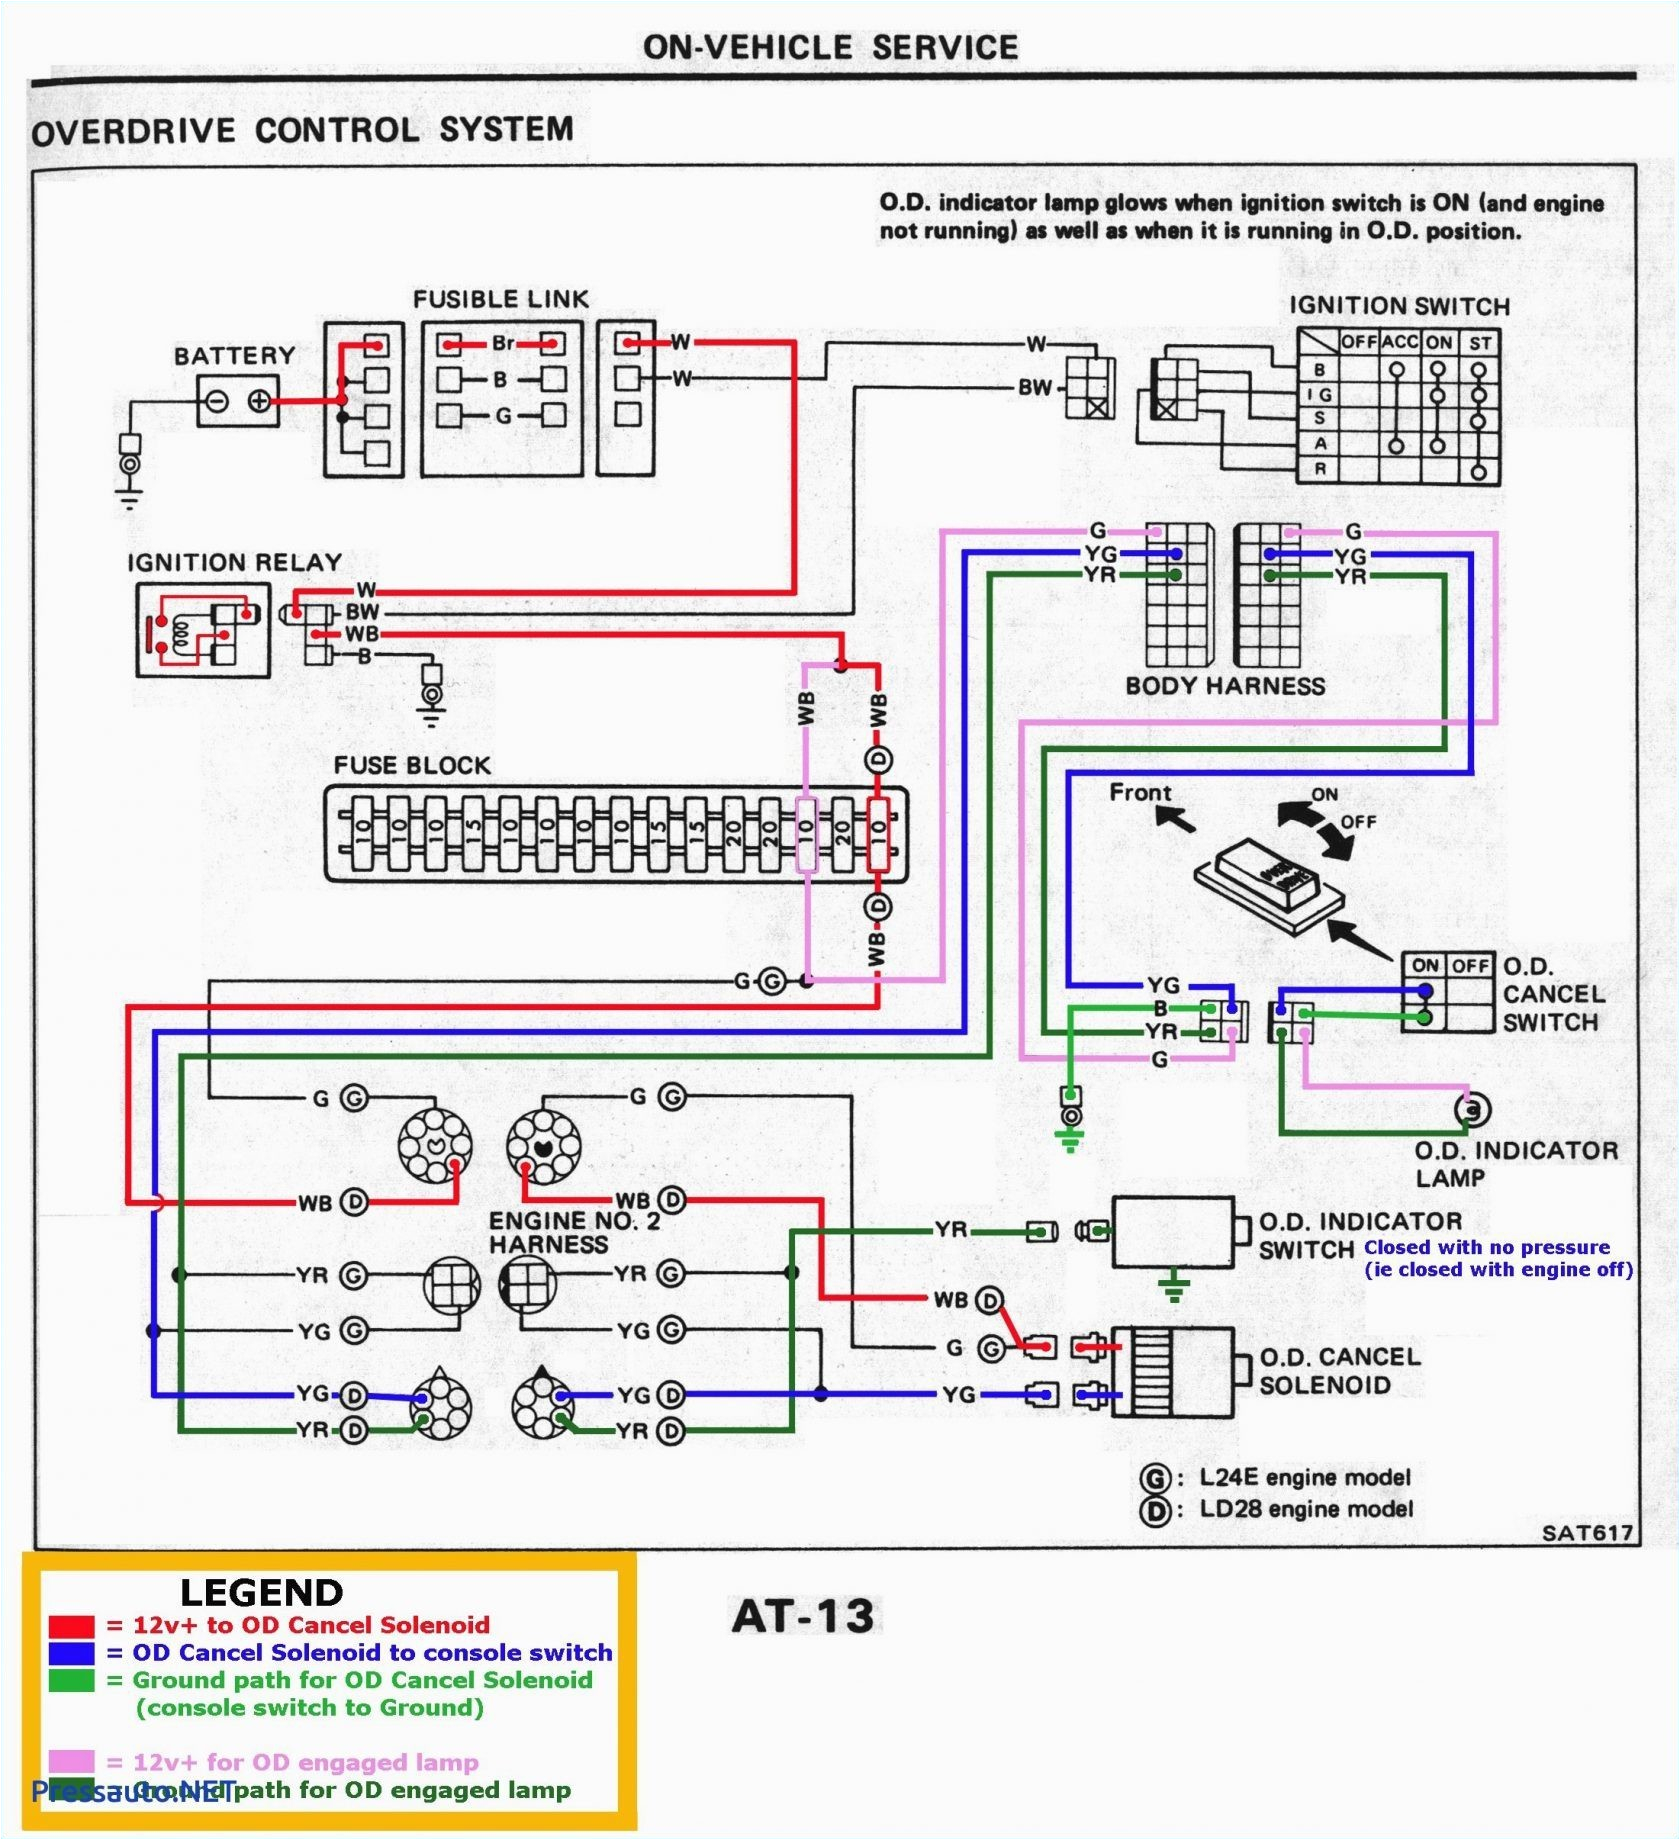 national tradewinds rv wiring diagram free picture getting readyfree rv wiring diagrams wiring diagram page national